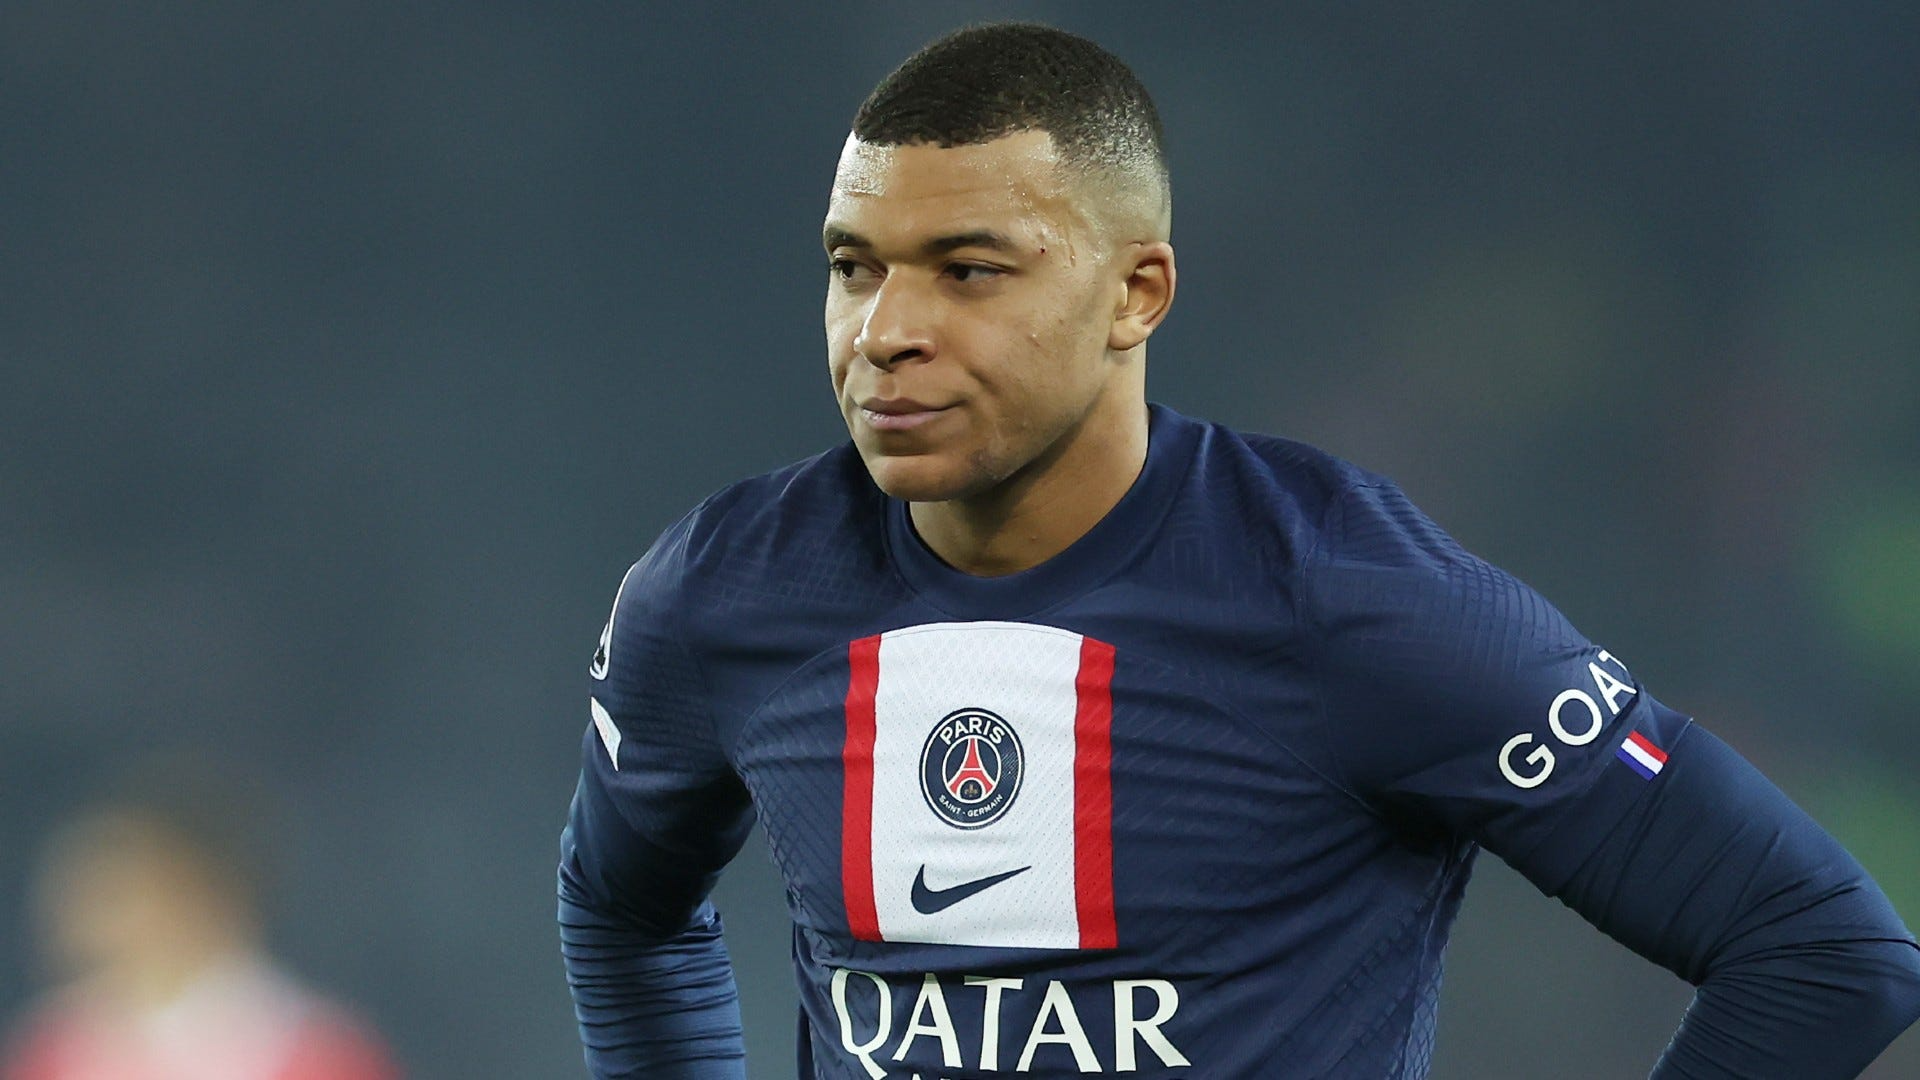 COPE: Real Madrid not Ready to Pay PSG €250 Million for Mbappé's Transfer